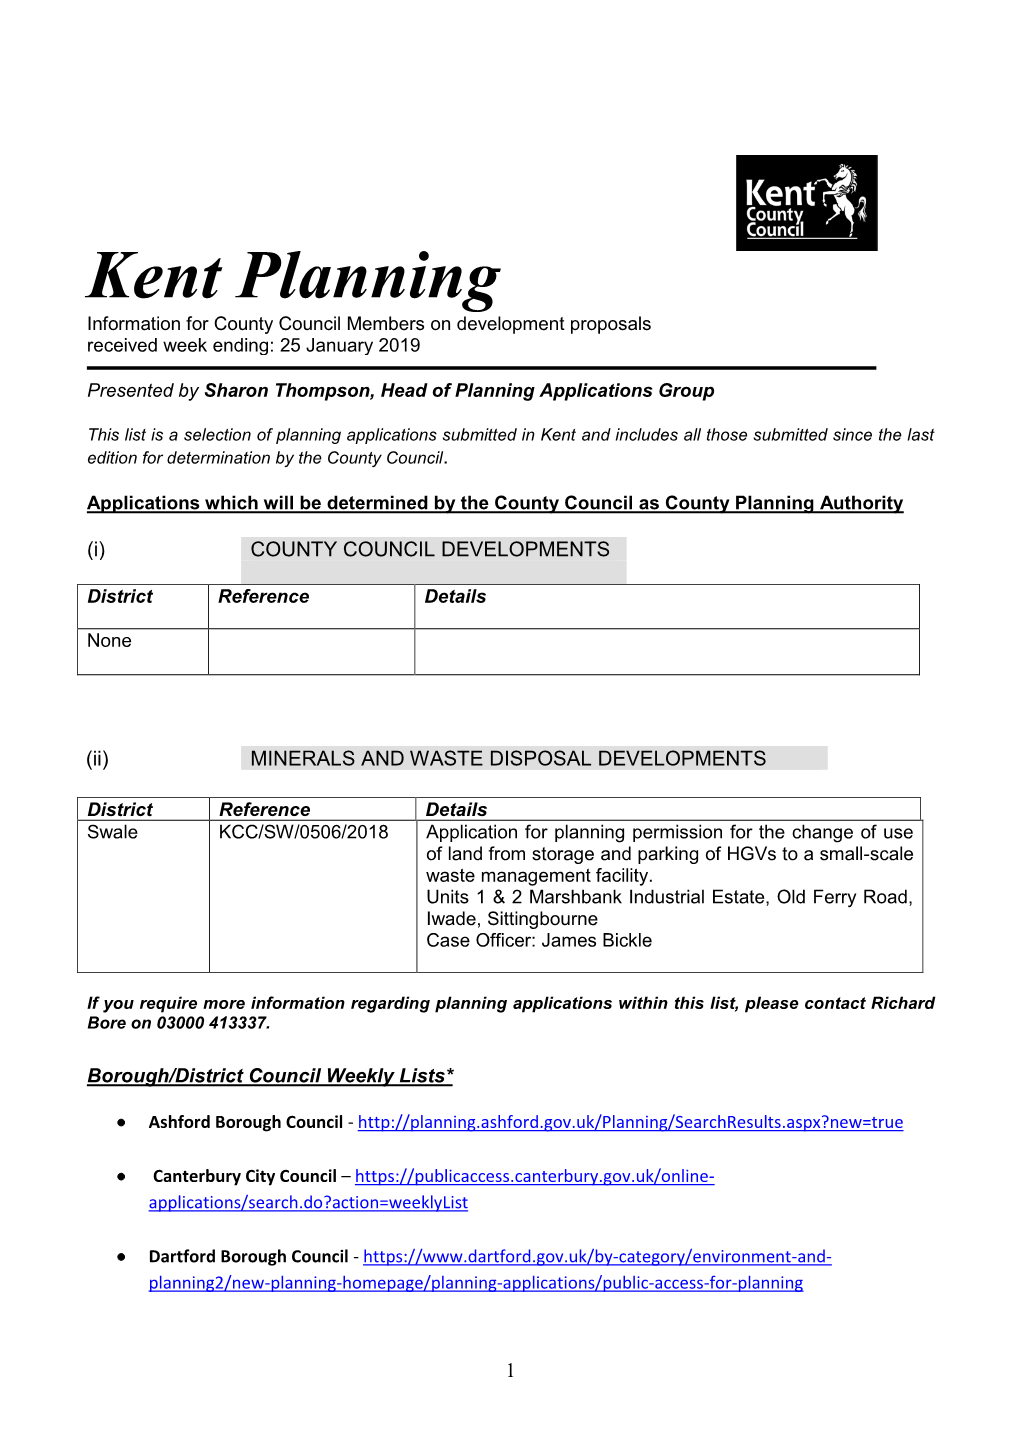 Kent Planning Information for County Council Members on Development Proposals Received Week Ending: 25 January 2019